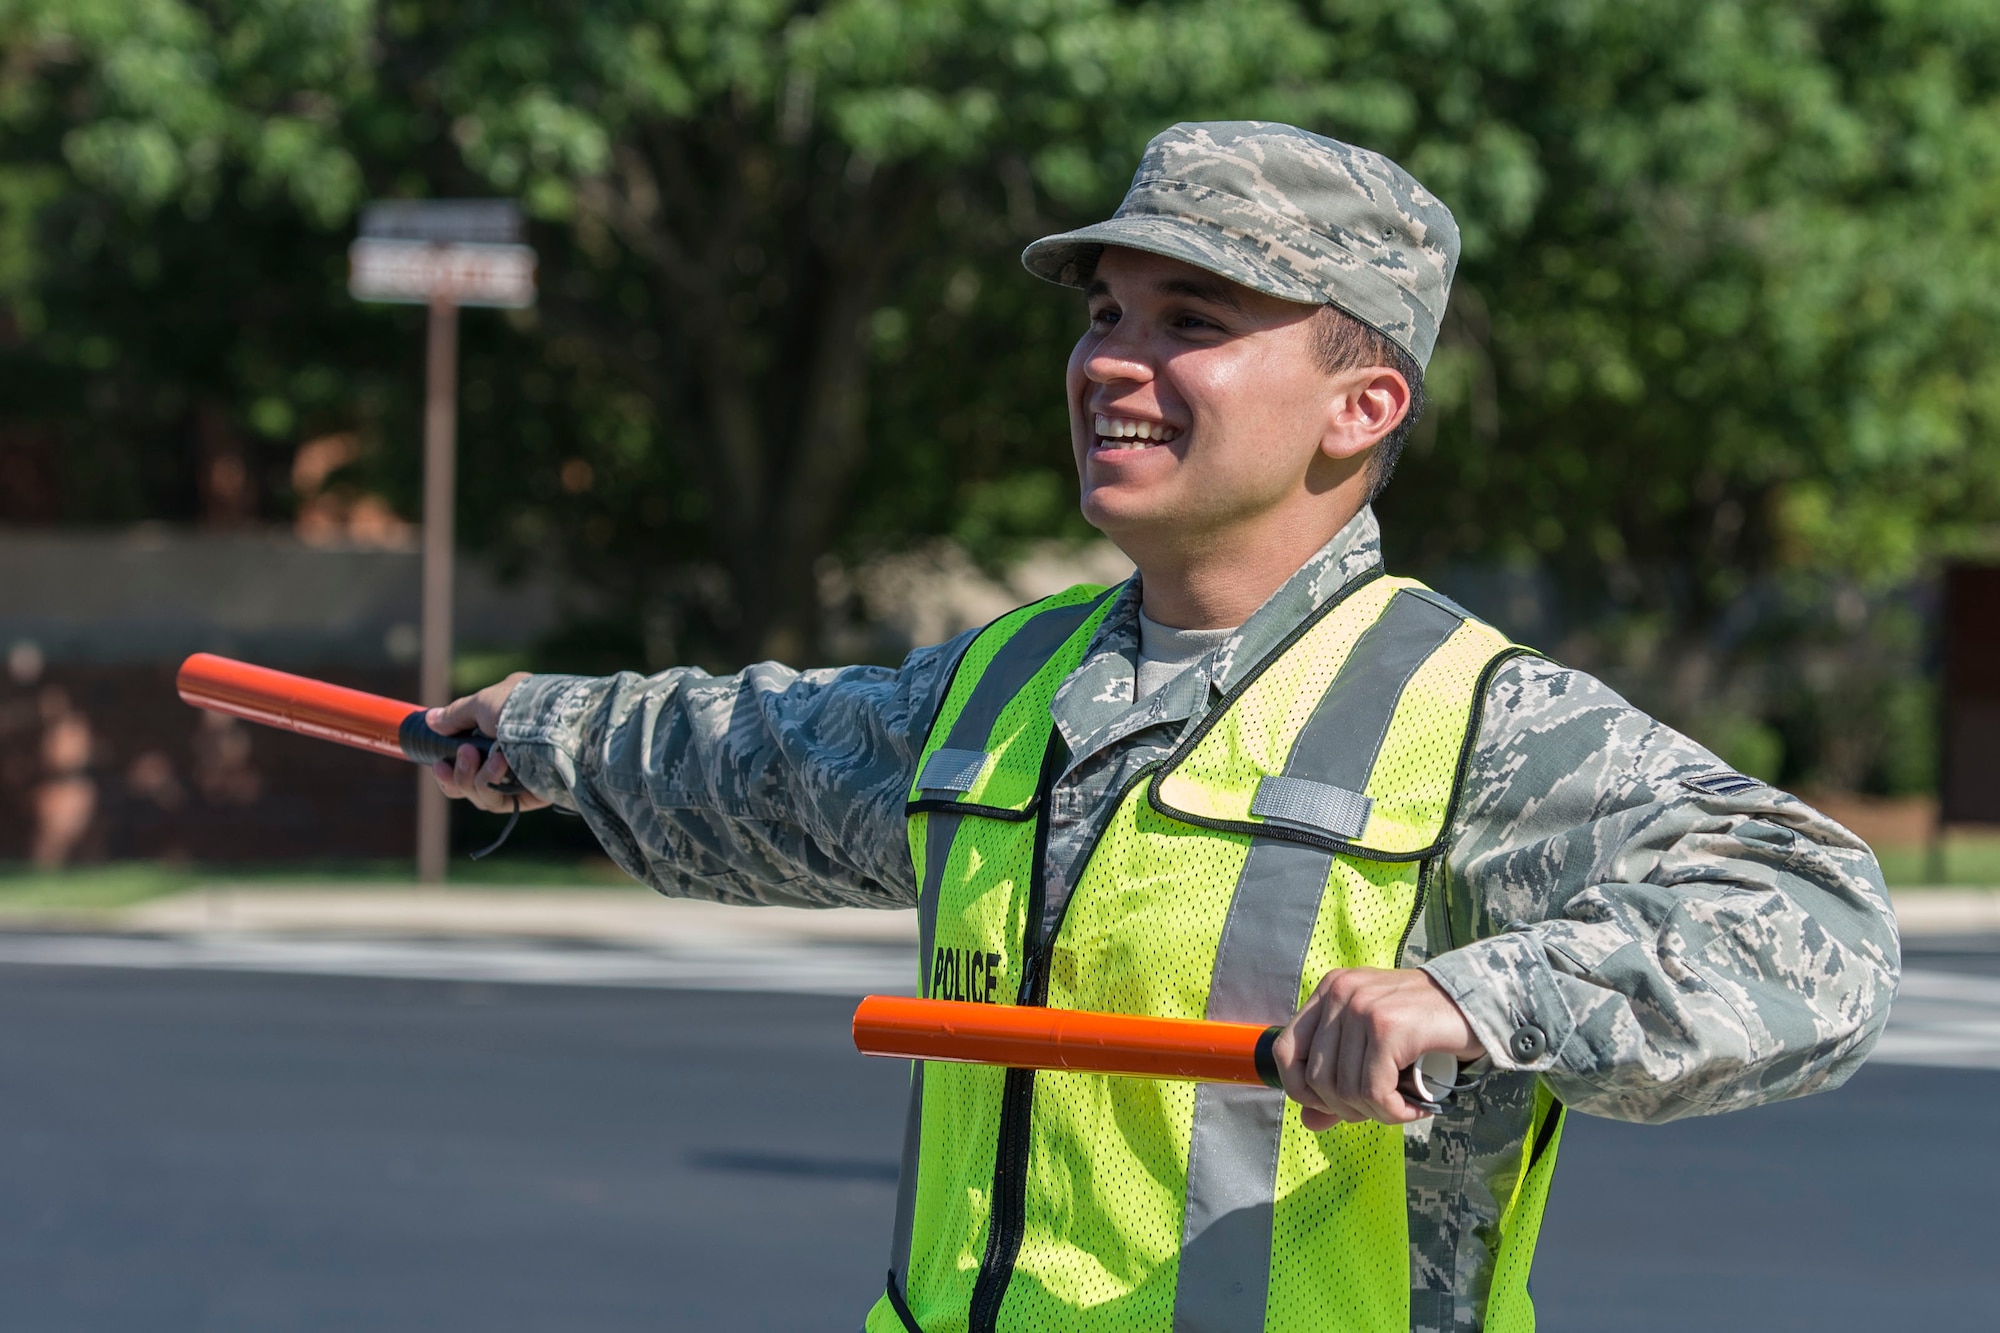 A volunteer directs traffic during the Centennial Celebration Air Show, June 11, 2017, Scott Air Force Base, Ill. Scott AFB opened in 1917, previously named Scott Field, the base has seen its mission evolve and expand to encompass a multitude of priorities, including aeromedical evacuation and communications. (U.S. Air Force photo by Senior Airman Melissa Estevez)